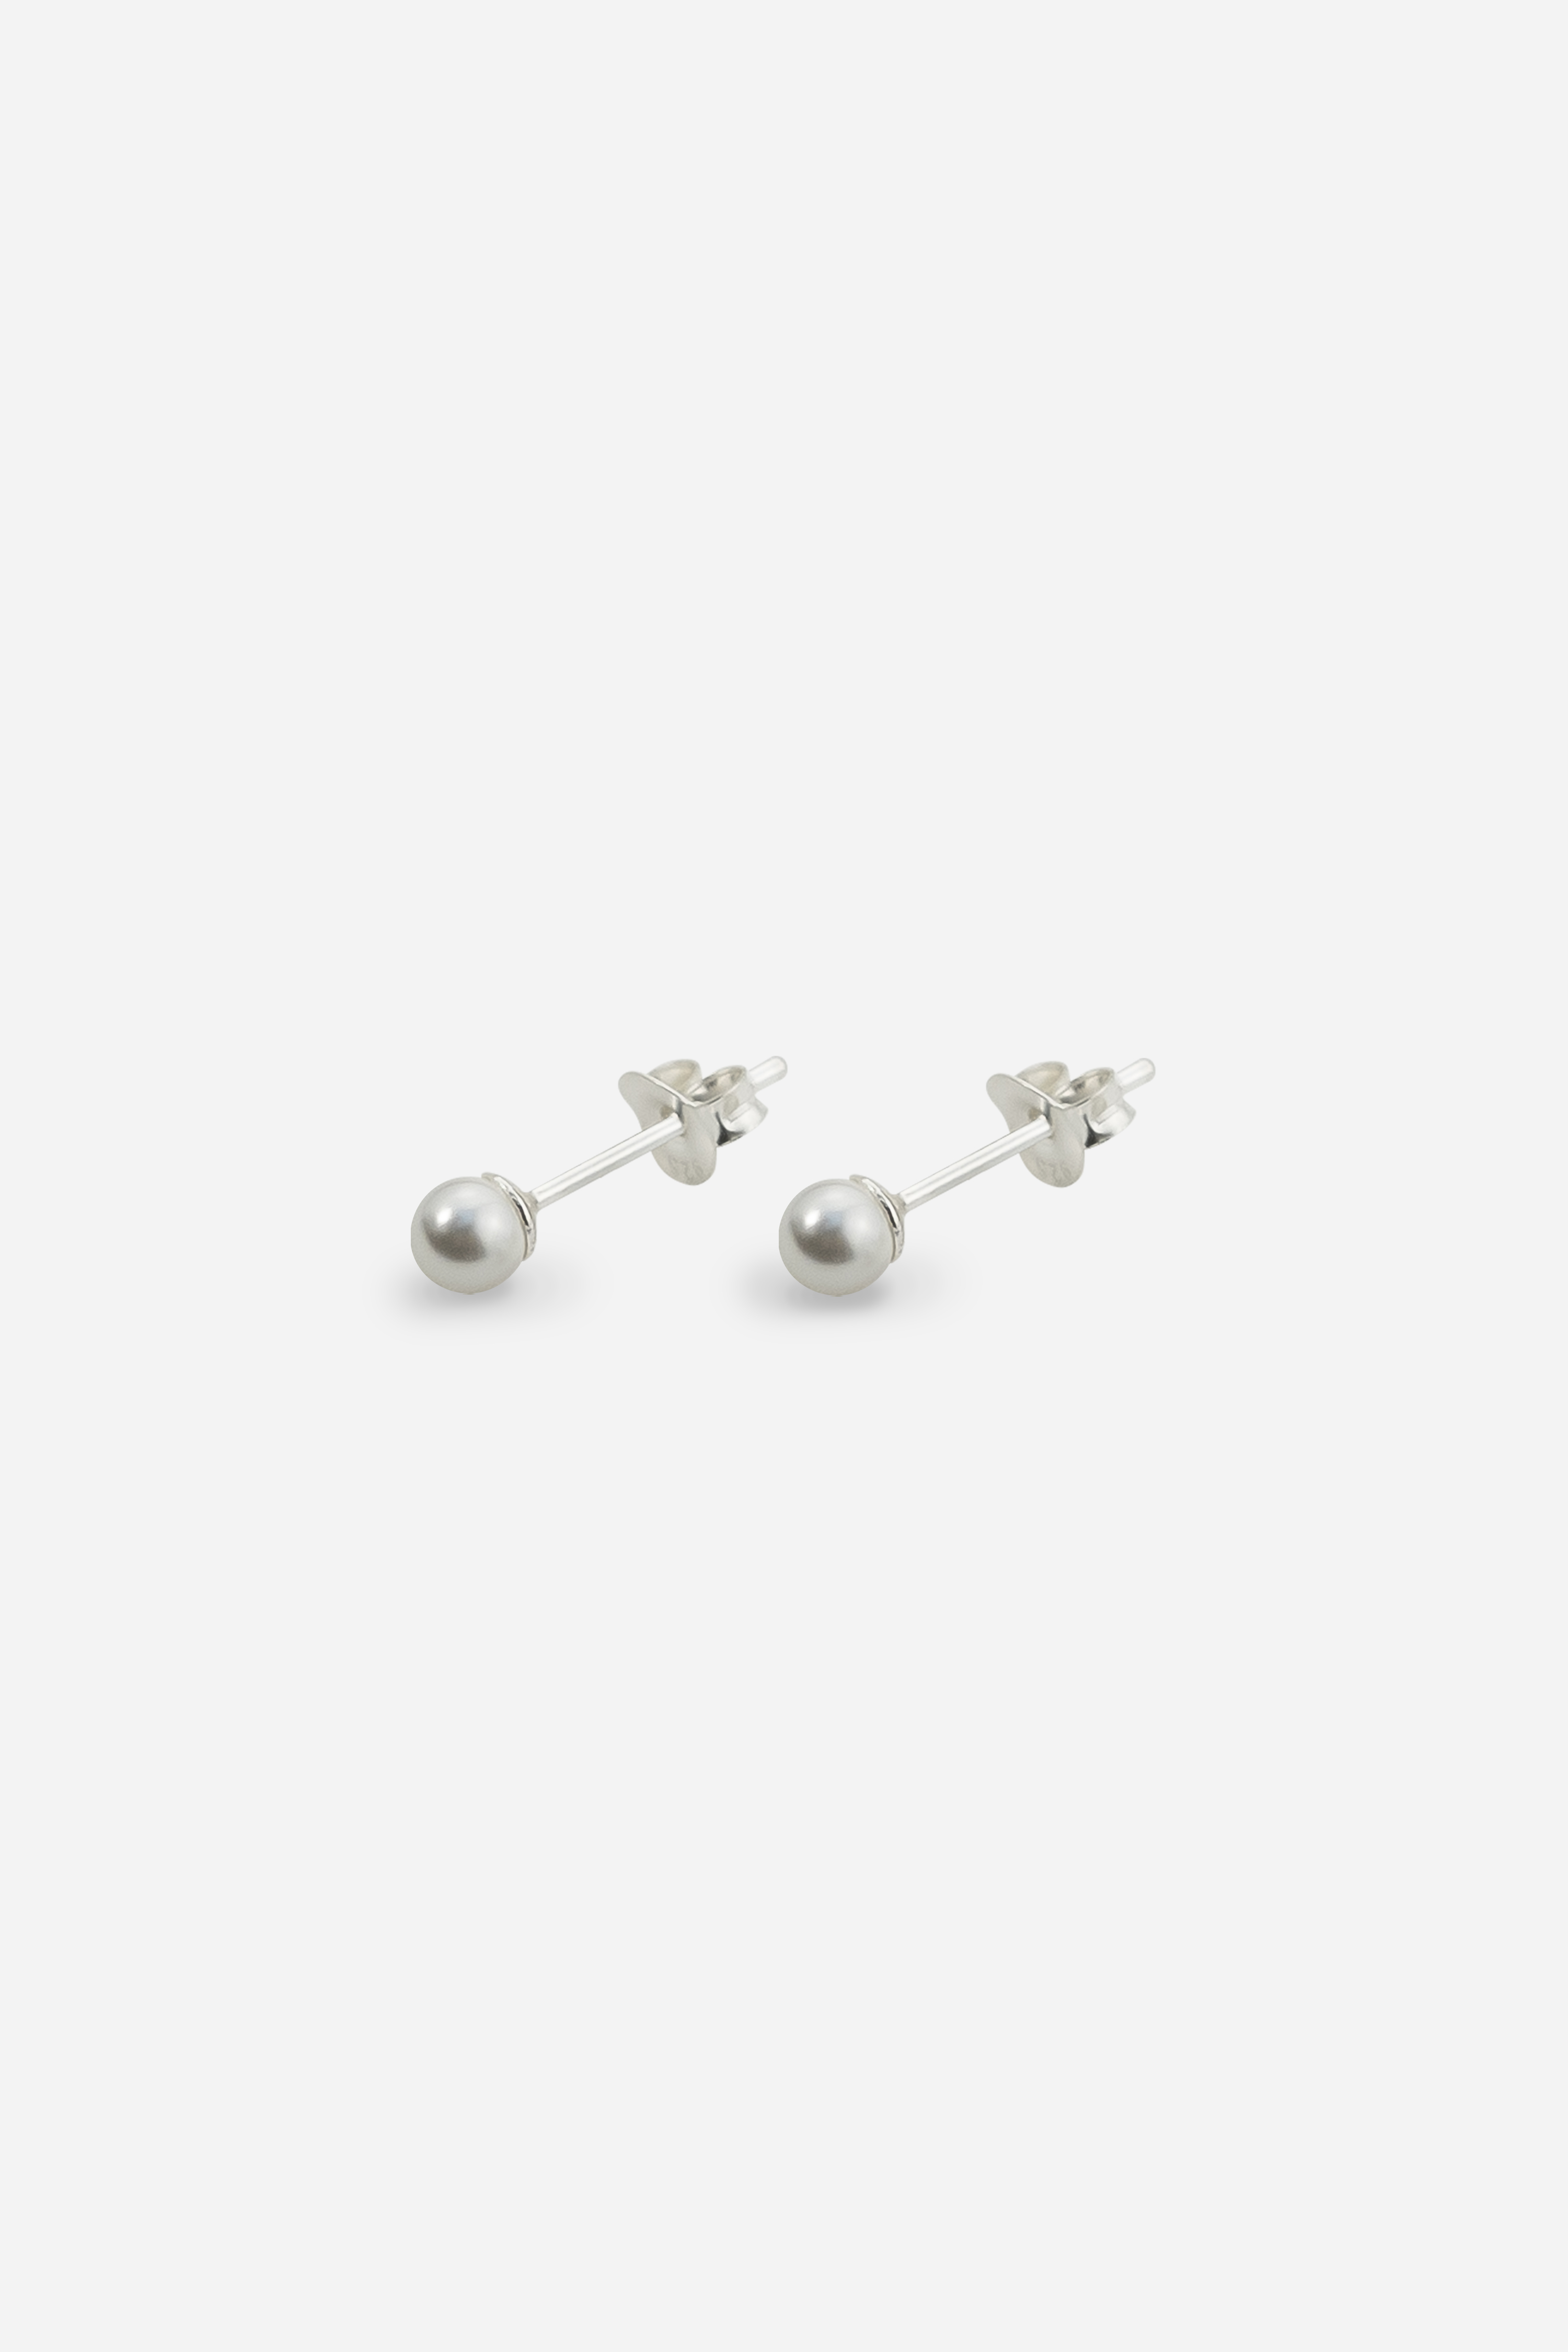 White 8mm Faux Pearl Sterling Silver Stud Earrings, Image 2 of 2